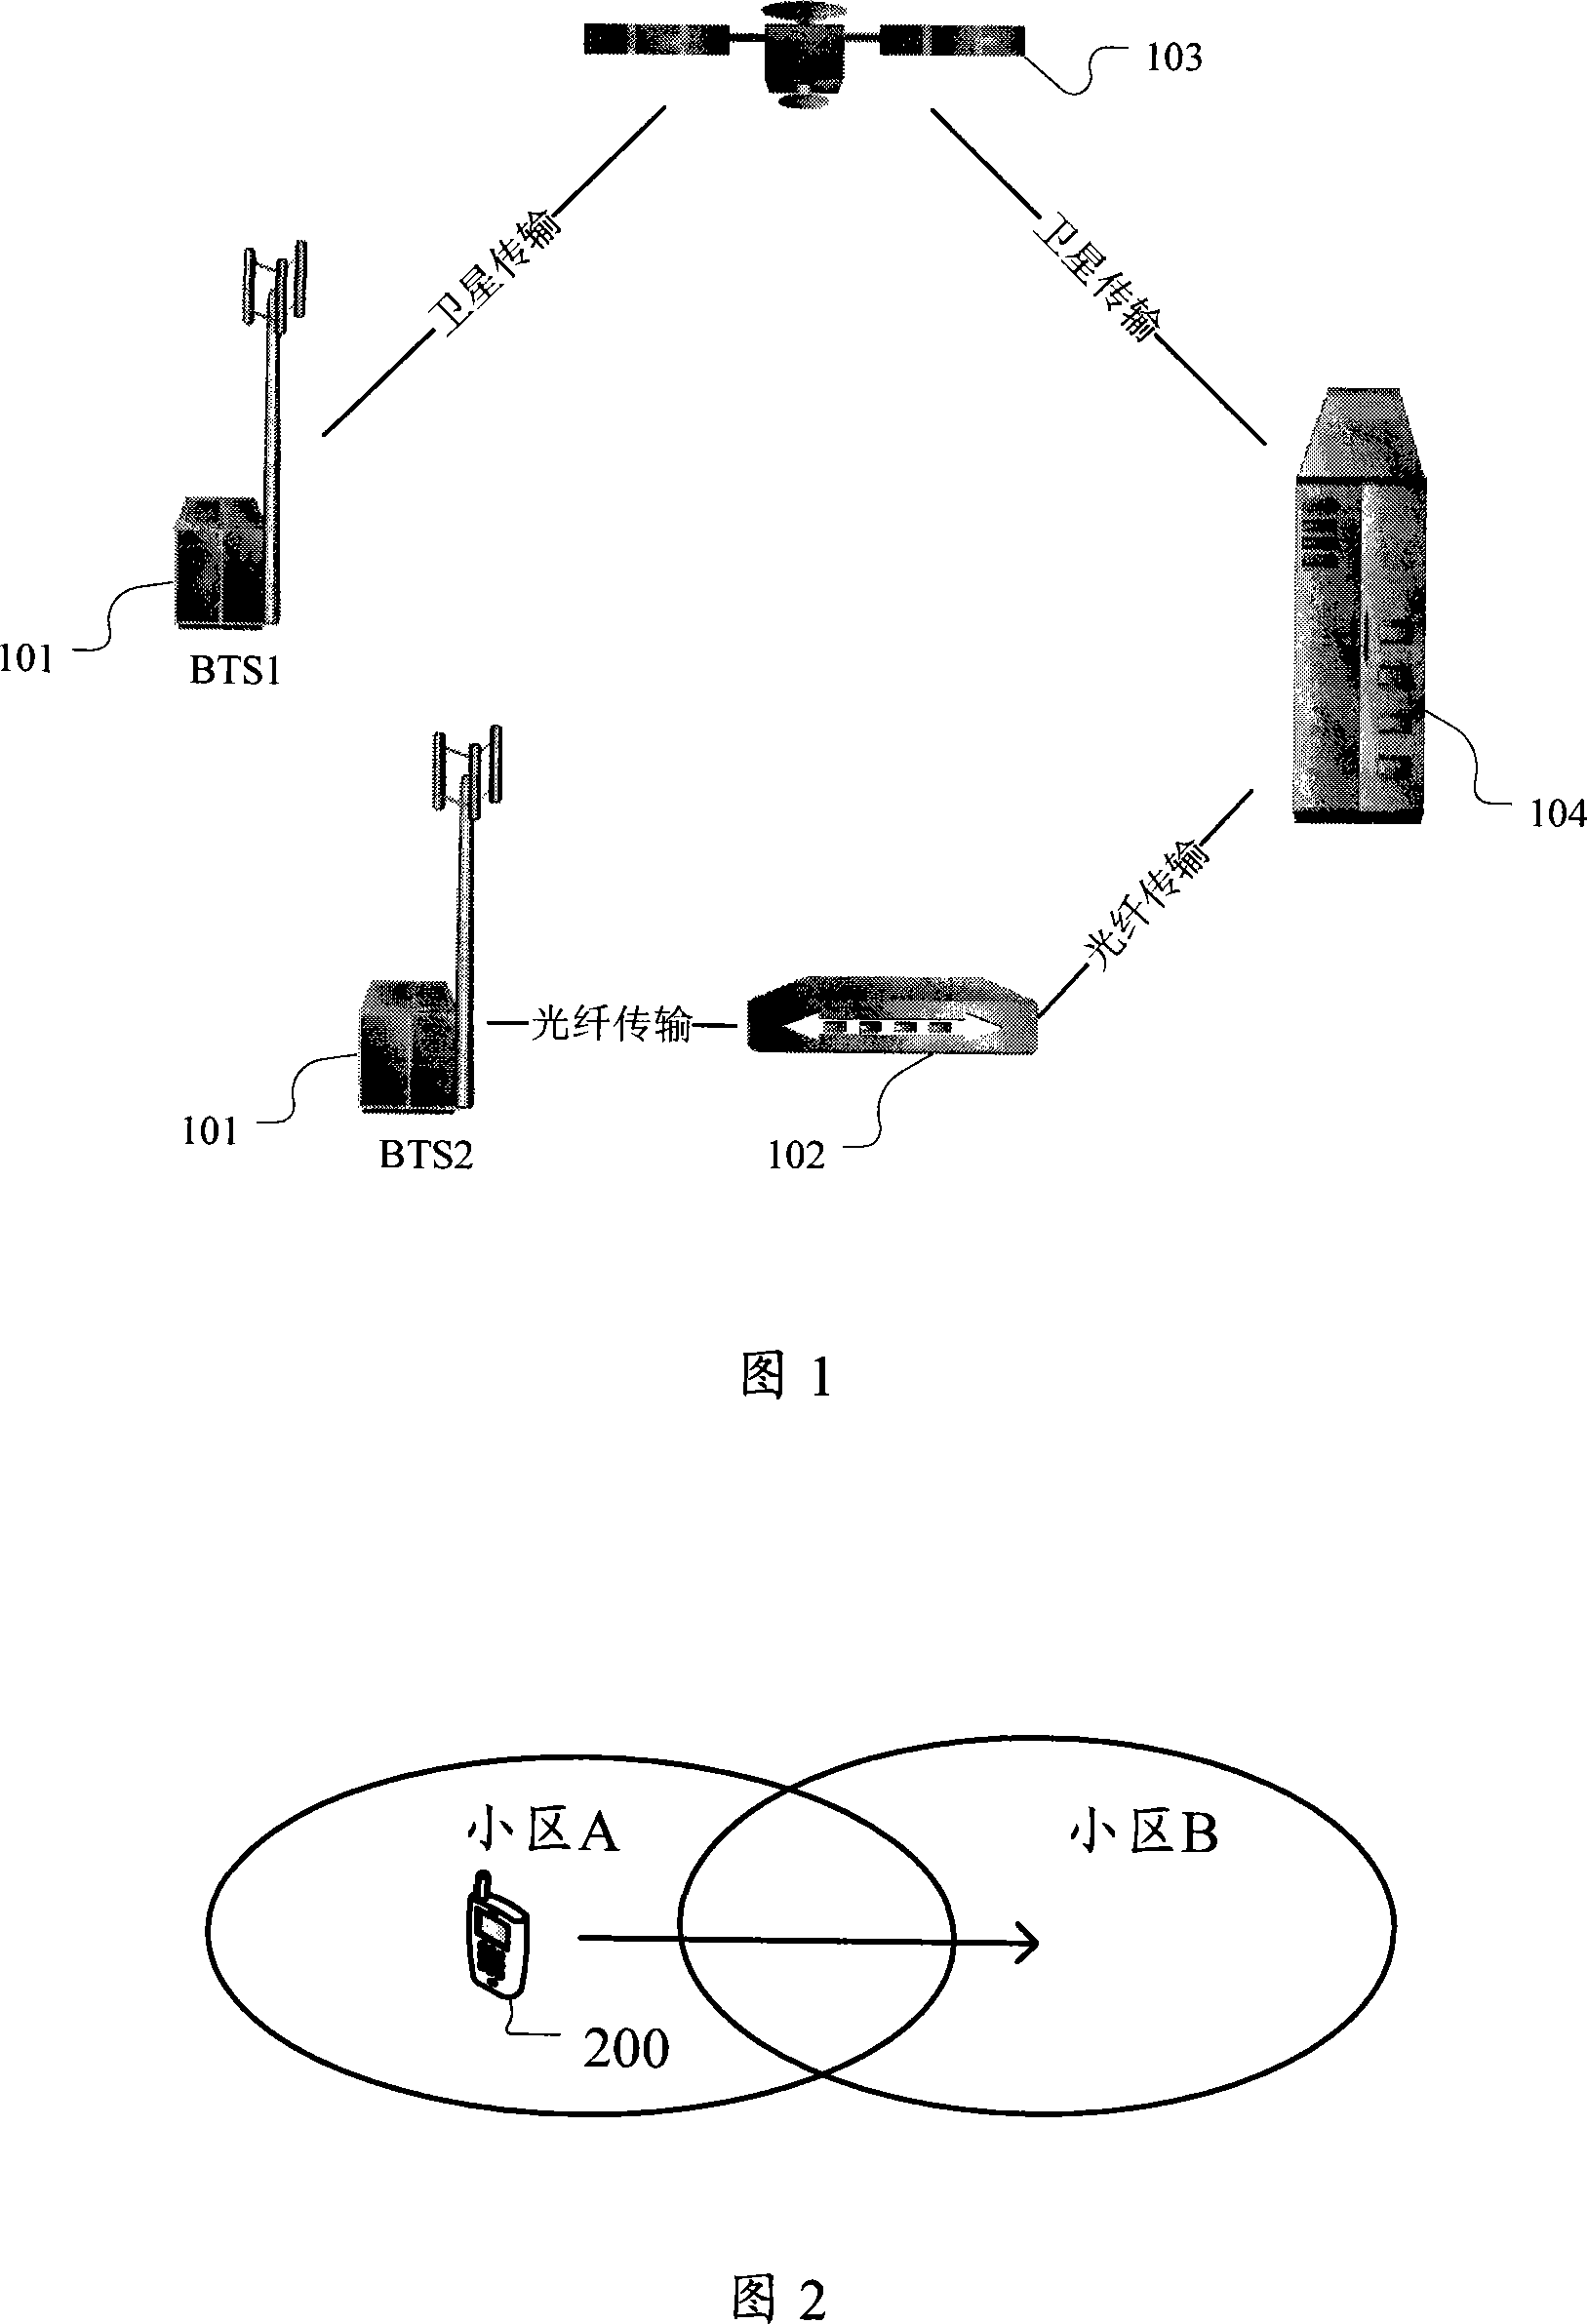 Method for switching boundary in multi-transmission type code division multiple access system